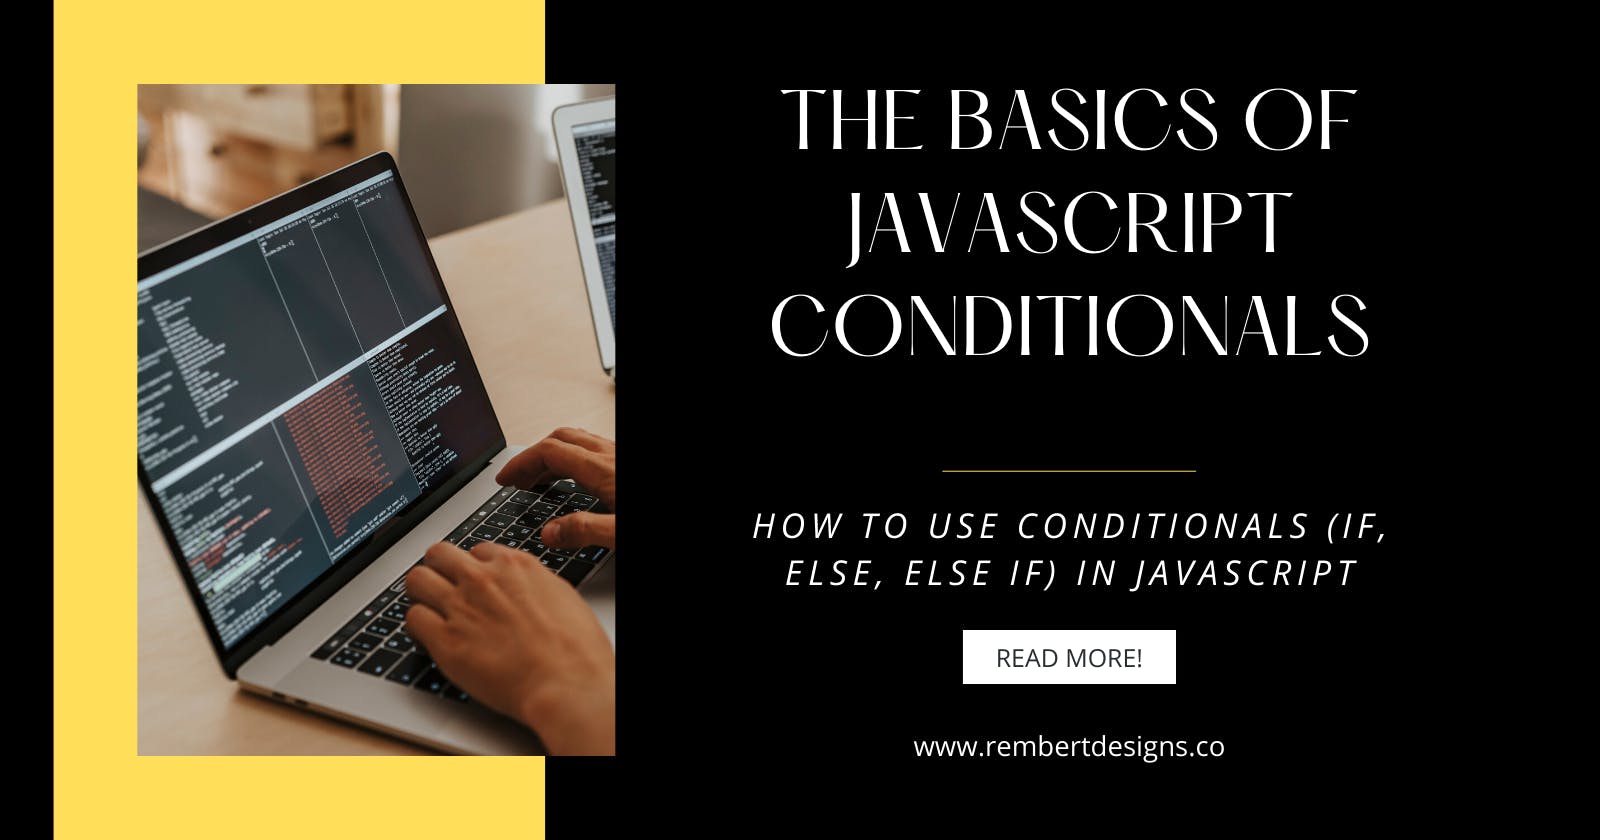 The Basics of JavaScript Conditionals